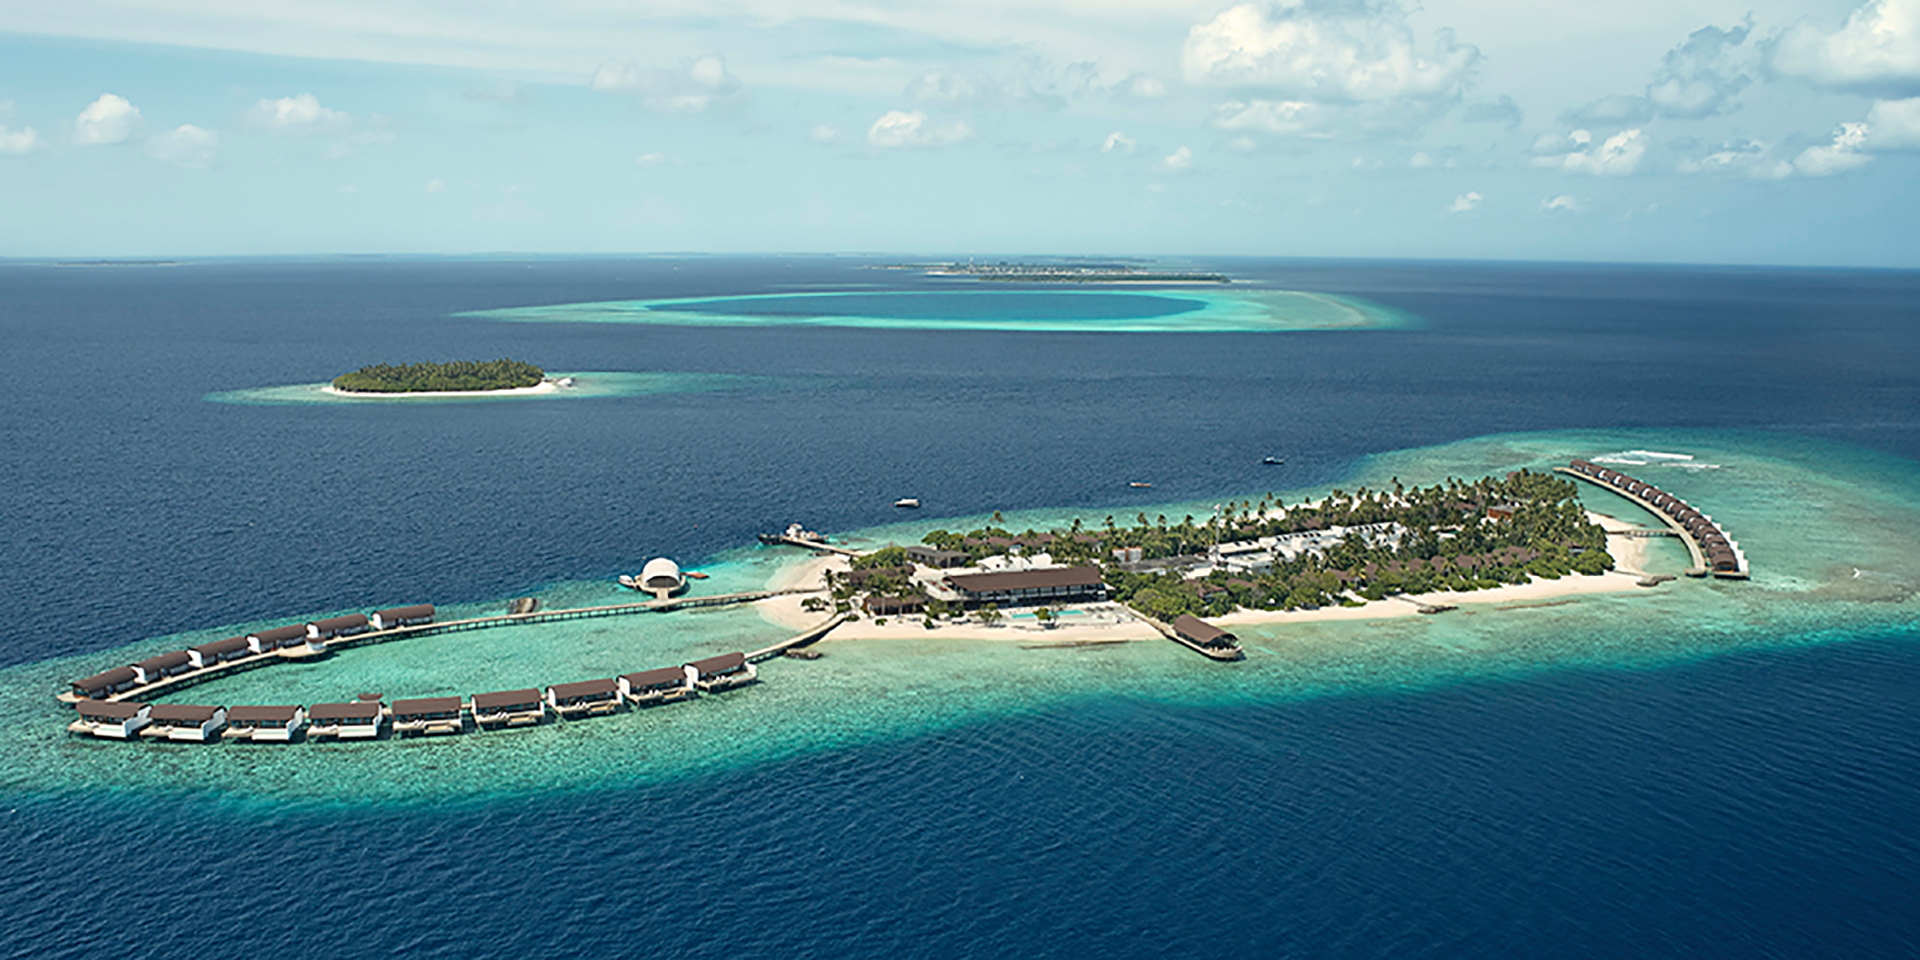 Marriott has expanded its Westin Hotels & Resorts brand to one of the world's leading honeymoon destinations, Maldives. Developed by Belluna Co. Ltd, Japan and Asia Capital PLC, Sri Lanka, The Westin Maldives Miriandhoo Resort is located in the Baa Atoll, a designated UNESCO Biosphere Reserve site. Click to enlarge.